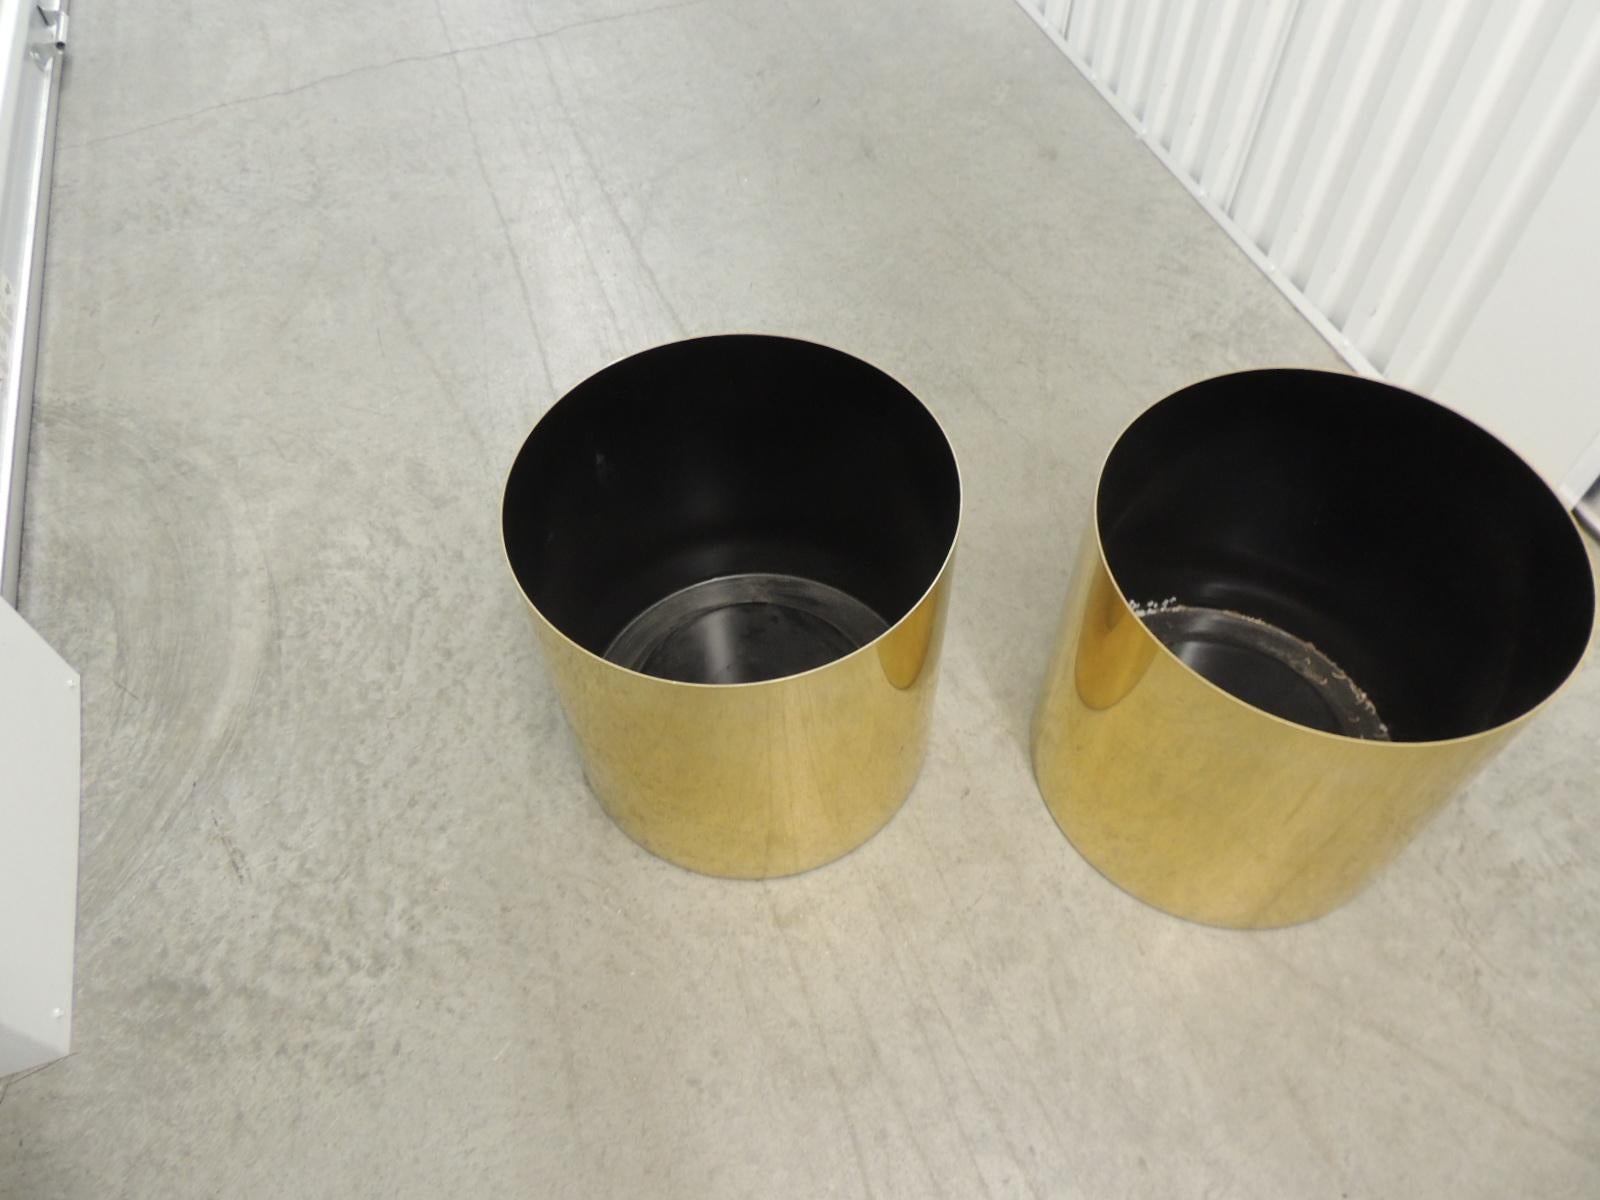 Large Mid-Century Modern polished gold color round planters.
Size: 14